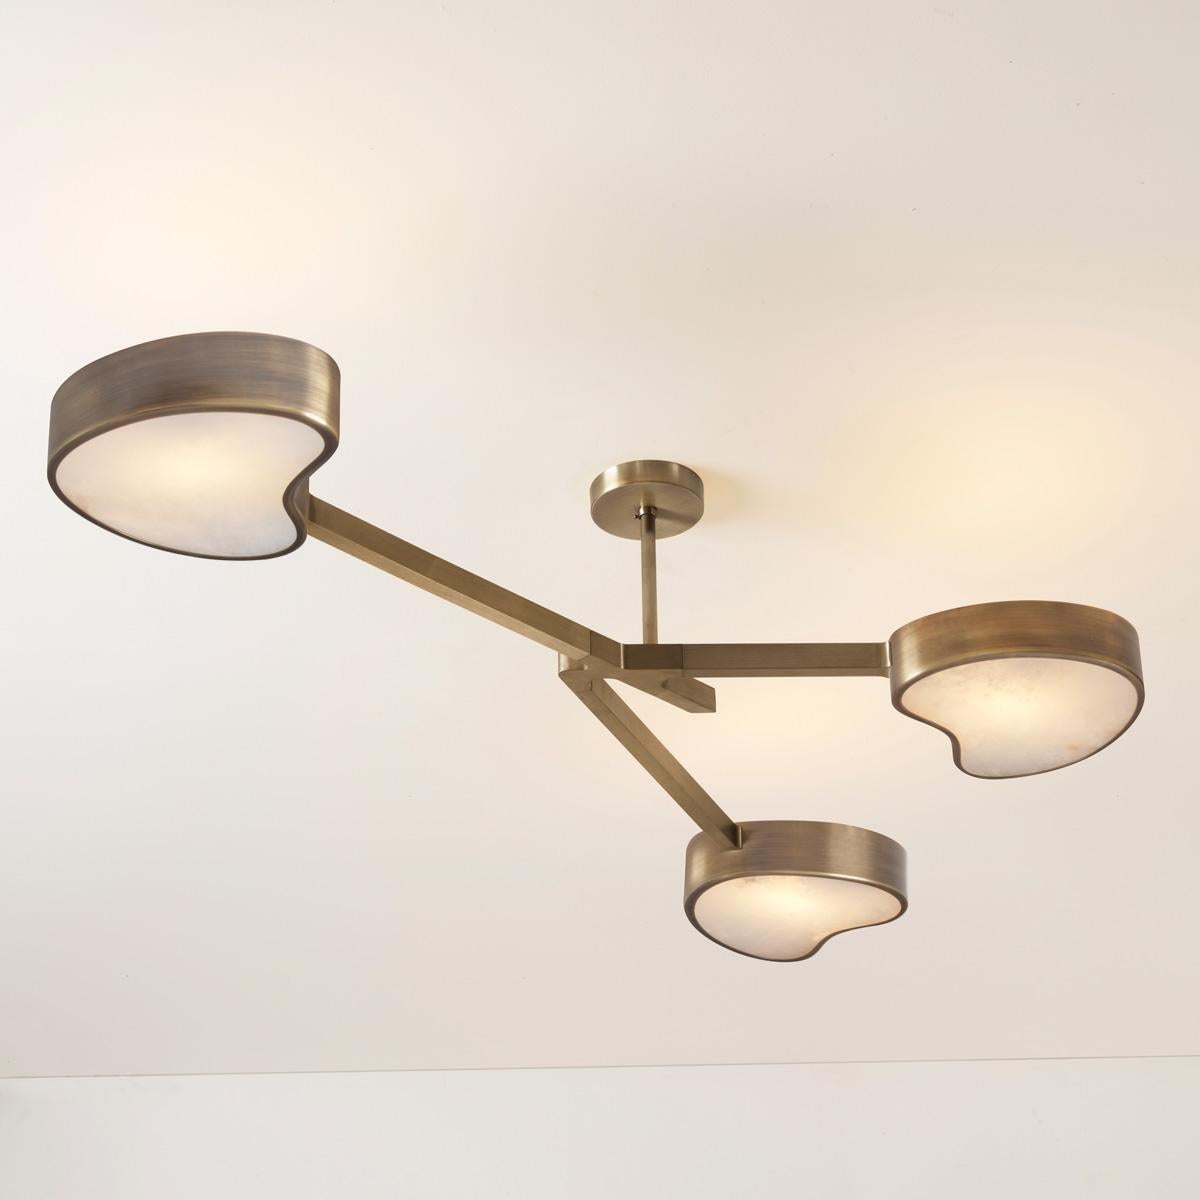 Cuore N.3 Ceiling Light by Gaspare Asaro. Satin Brass and Sand White For Sale 4